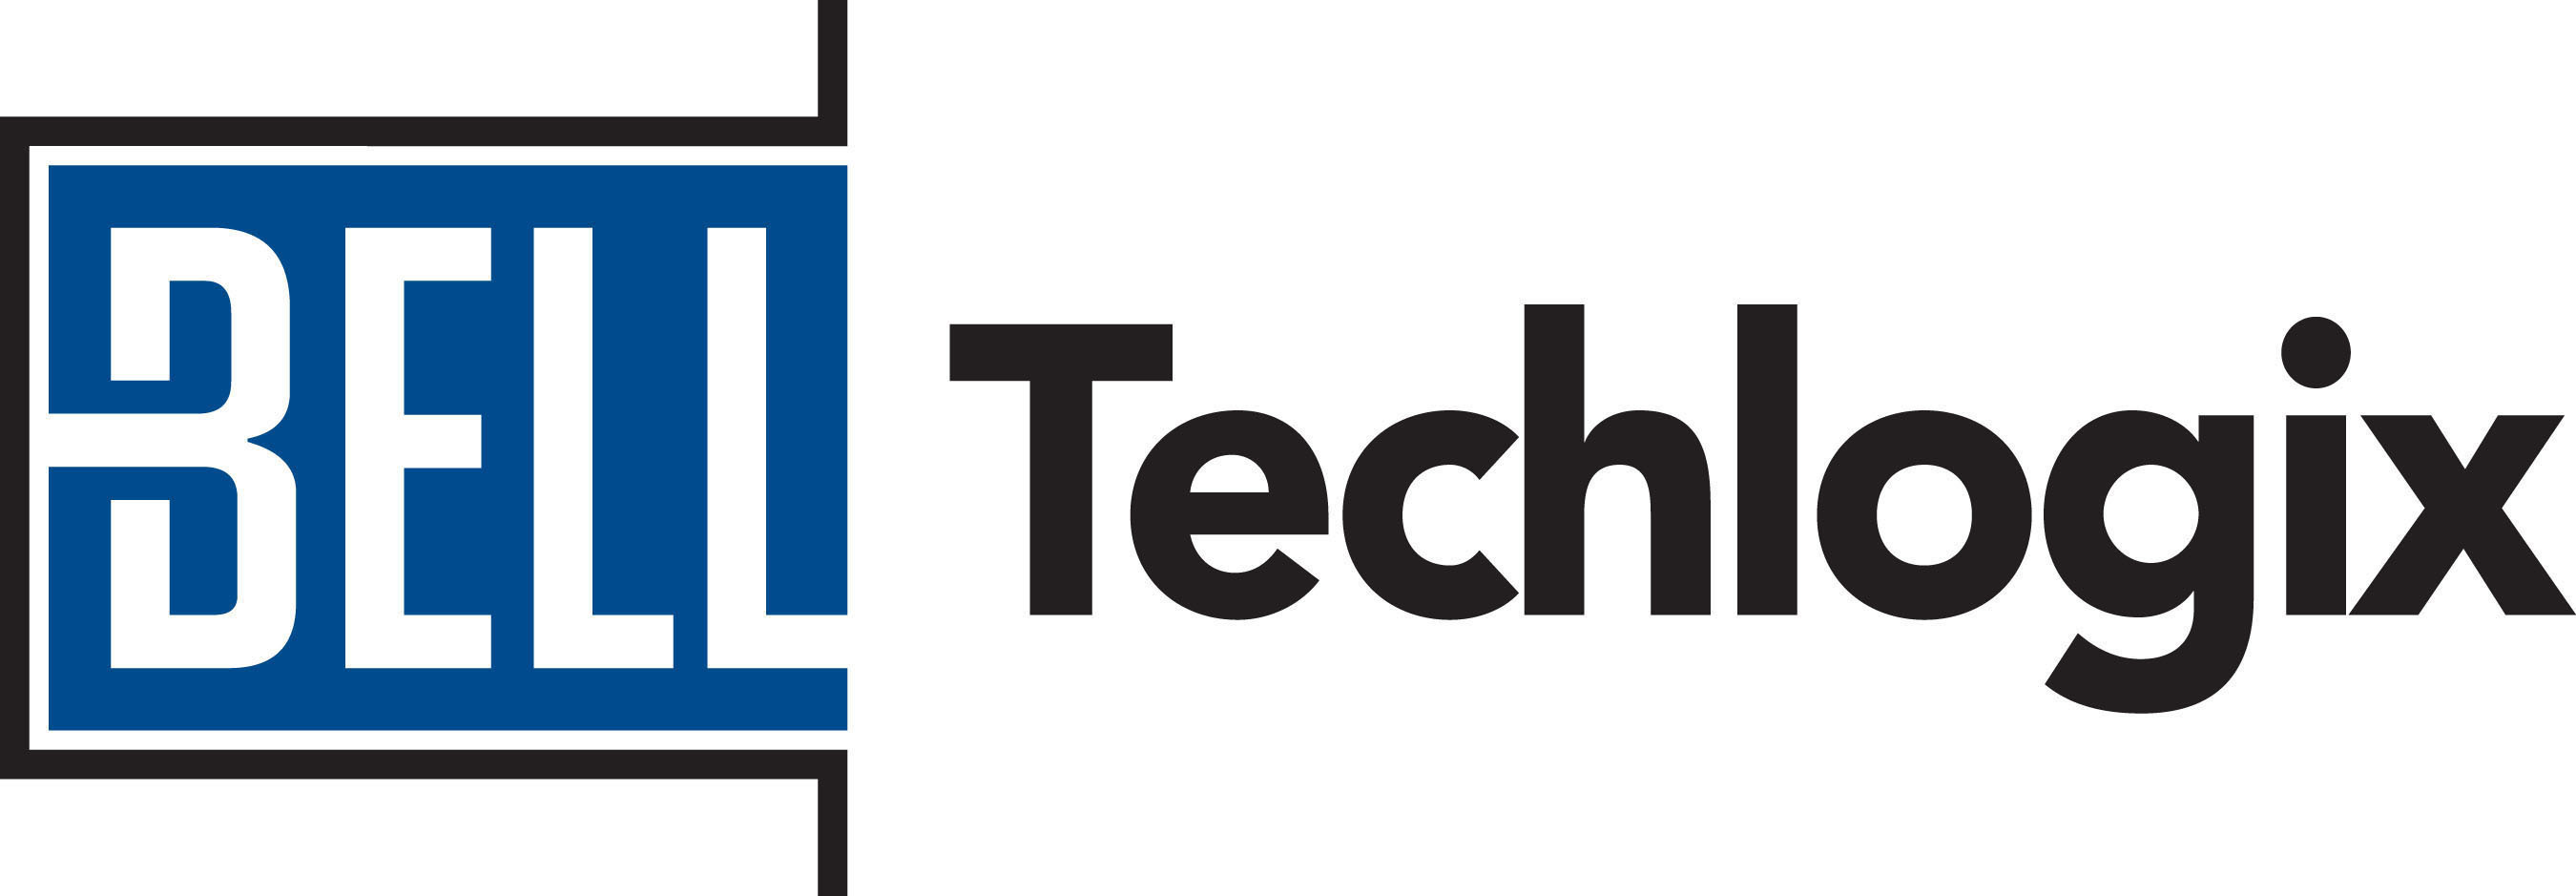 Bell Techlogix - information technology managed services and solutions.